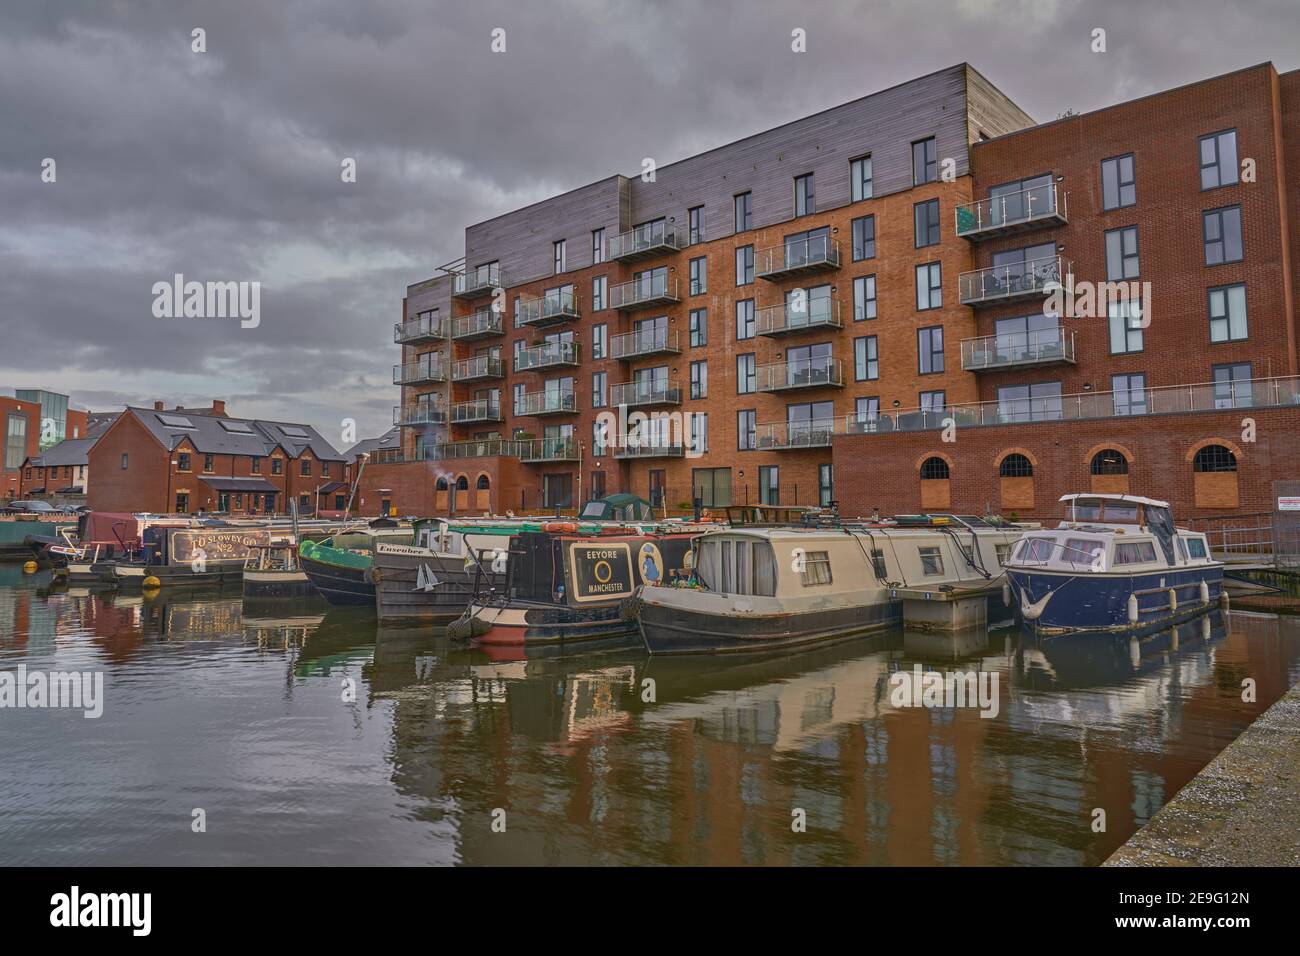 Marina for canal boats on the world famous Rochdale Canal Stock Photo